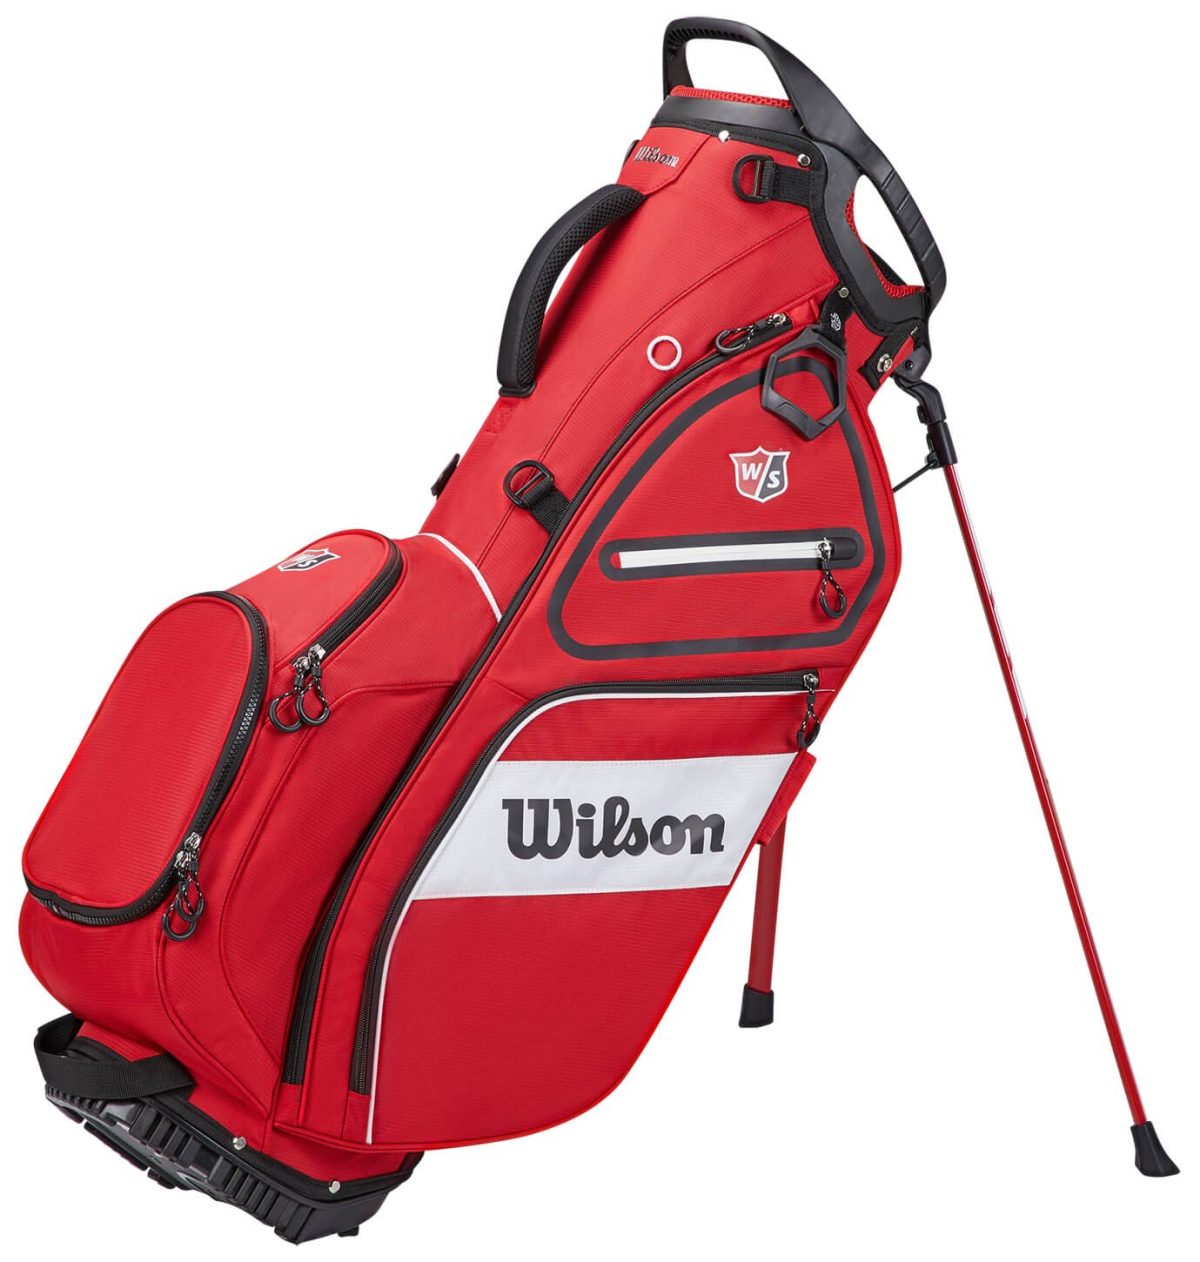 Wilson Exo Ii Carry Stand Bag in Red, Size 9.5" x 7.5"